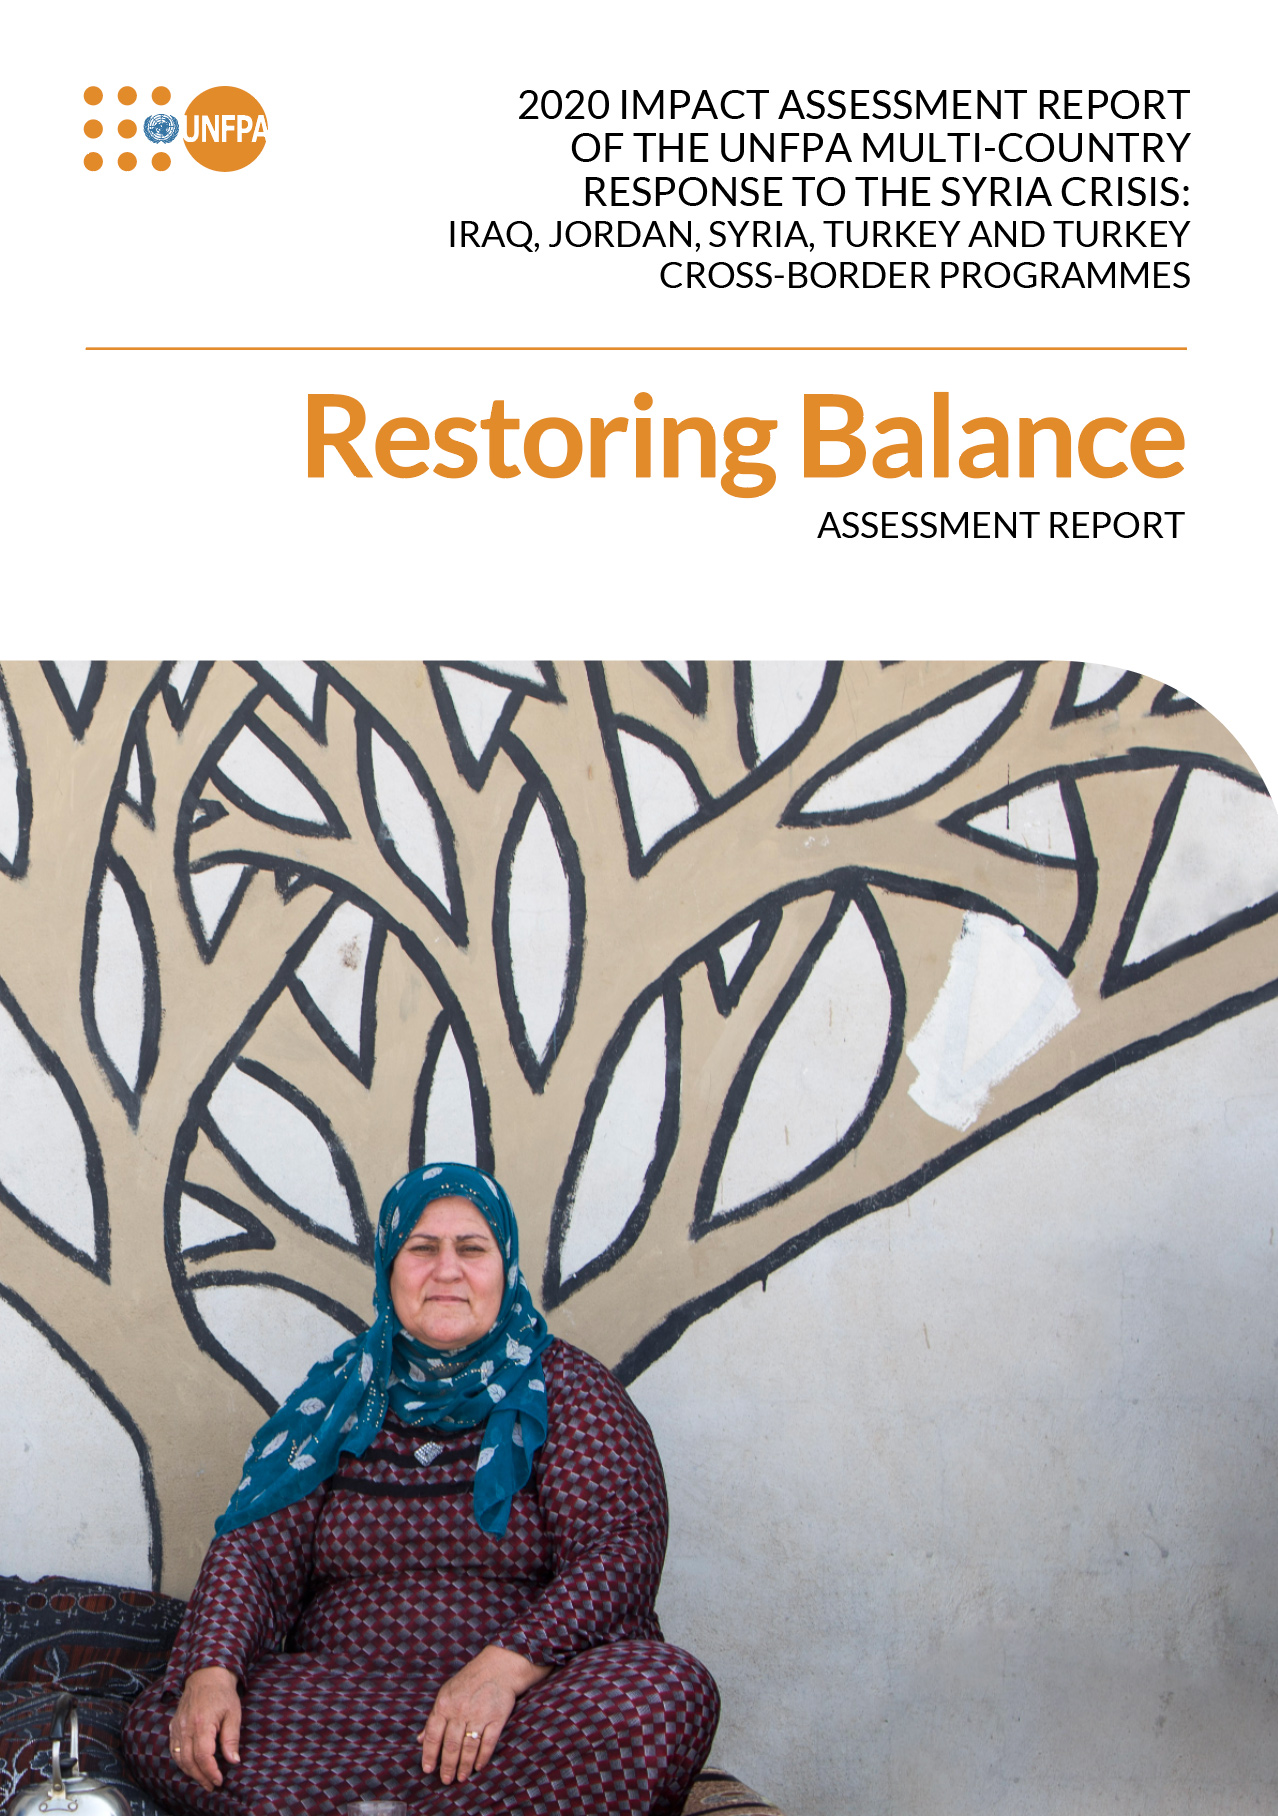 2020 IMPACT ASSESSMENT REPORT OF THE UNFPA MULTI-COUNTRY RESPONSE TO THE SYRIA CRISIS: IRAQ, JORDAN, SYRIA, TURKEY AND TURKEY CROSS-BORDER PROGRAMMES ASSESSMENT REPORT